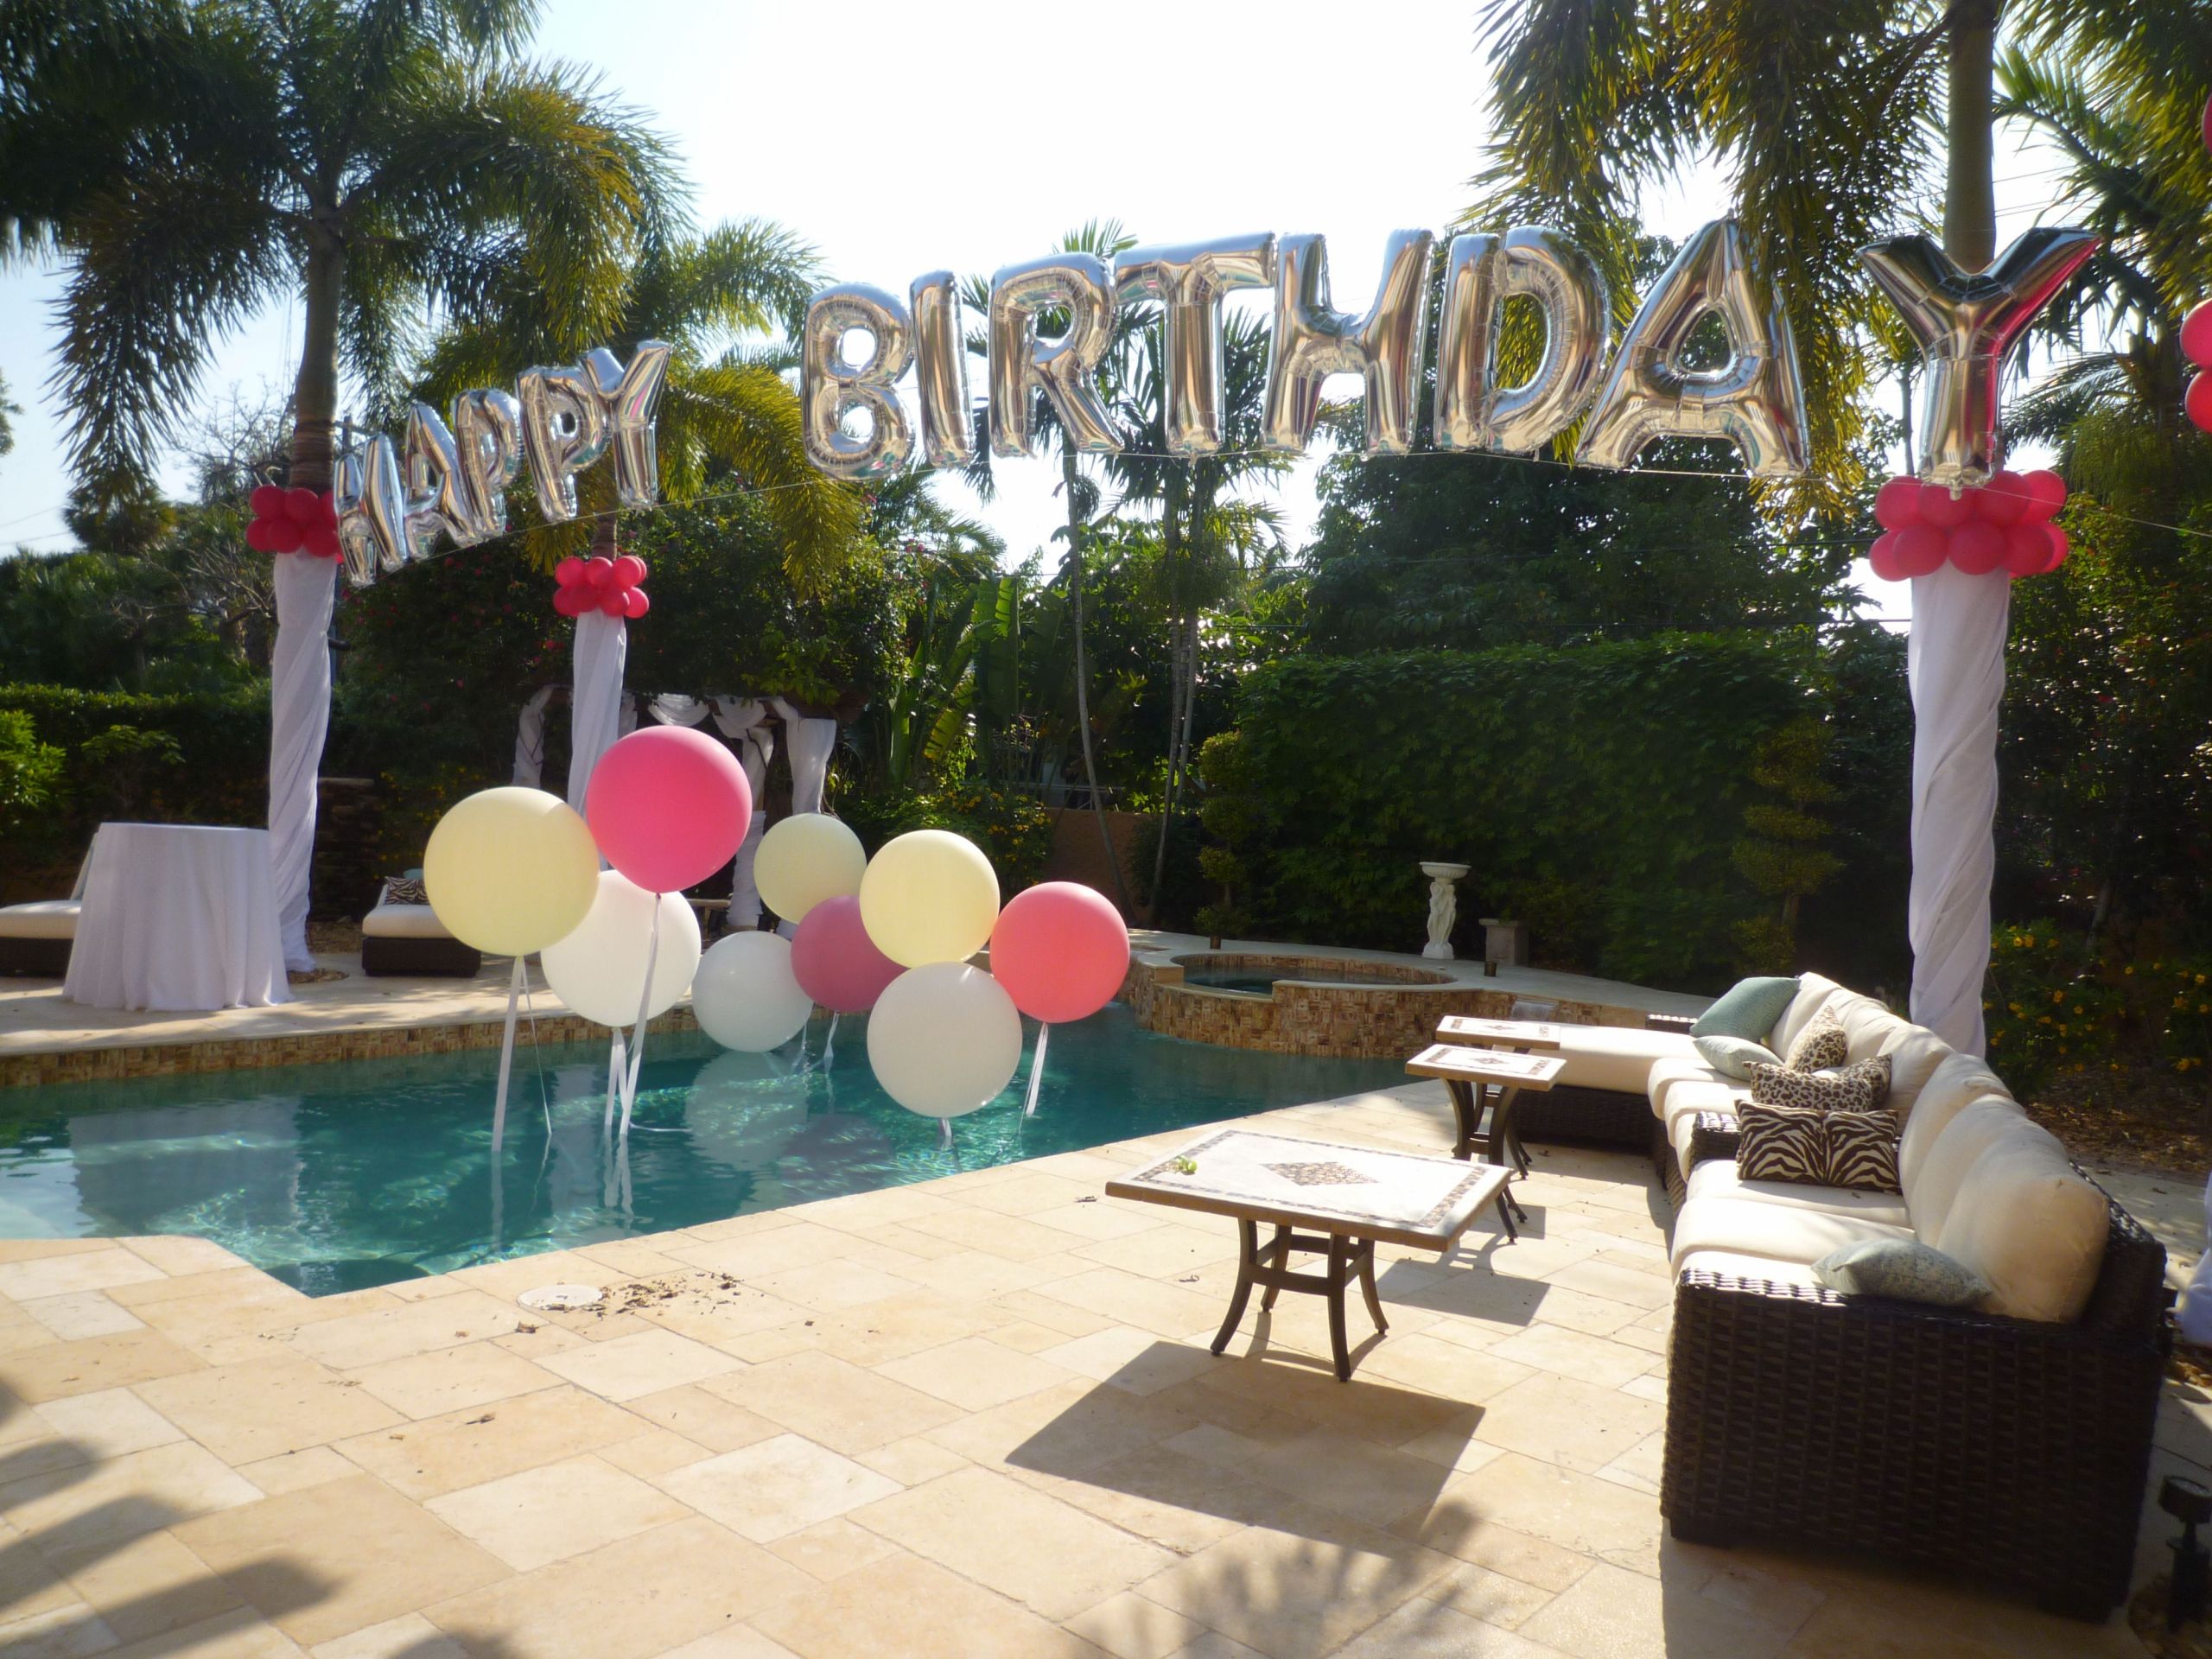 Poolside Party Decoration Ideas
 Birthday balloon arch over a swimming pool Backyard party